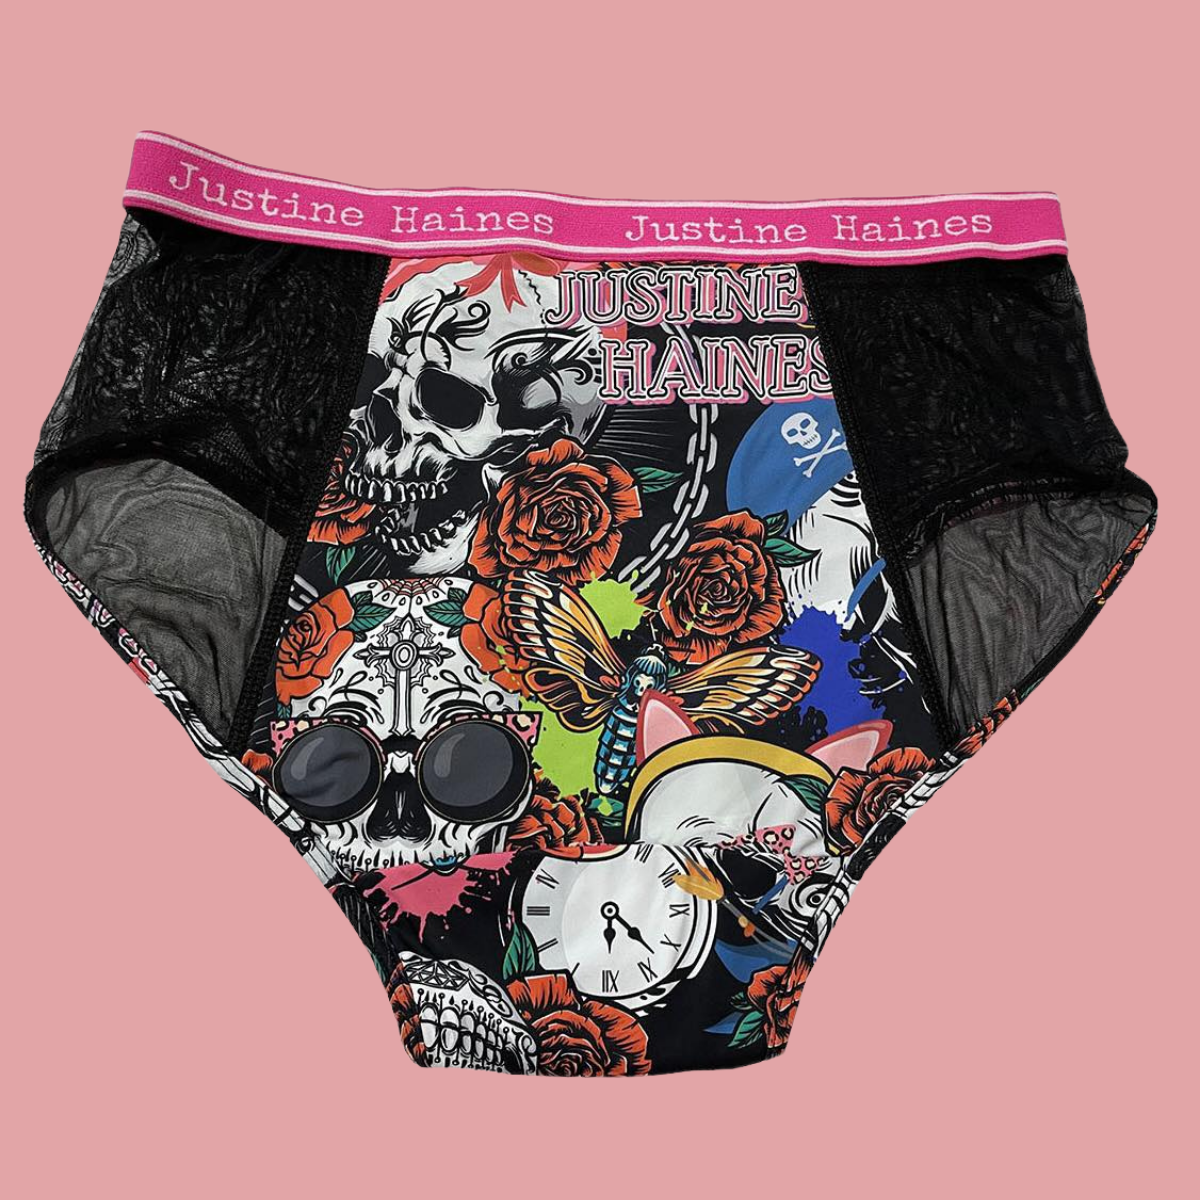 https://www.justinehaines.com/products/highrise-briefs-with-side-peek-a-boo-see-through-mesh-in-skulls-roses